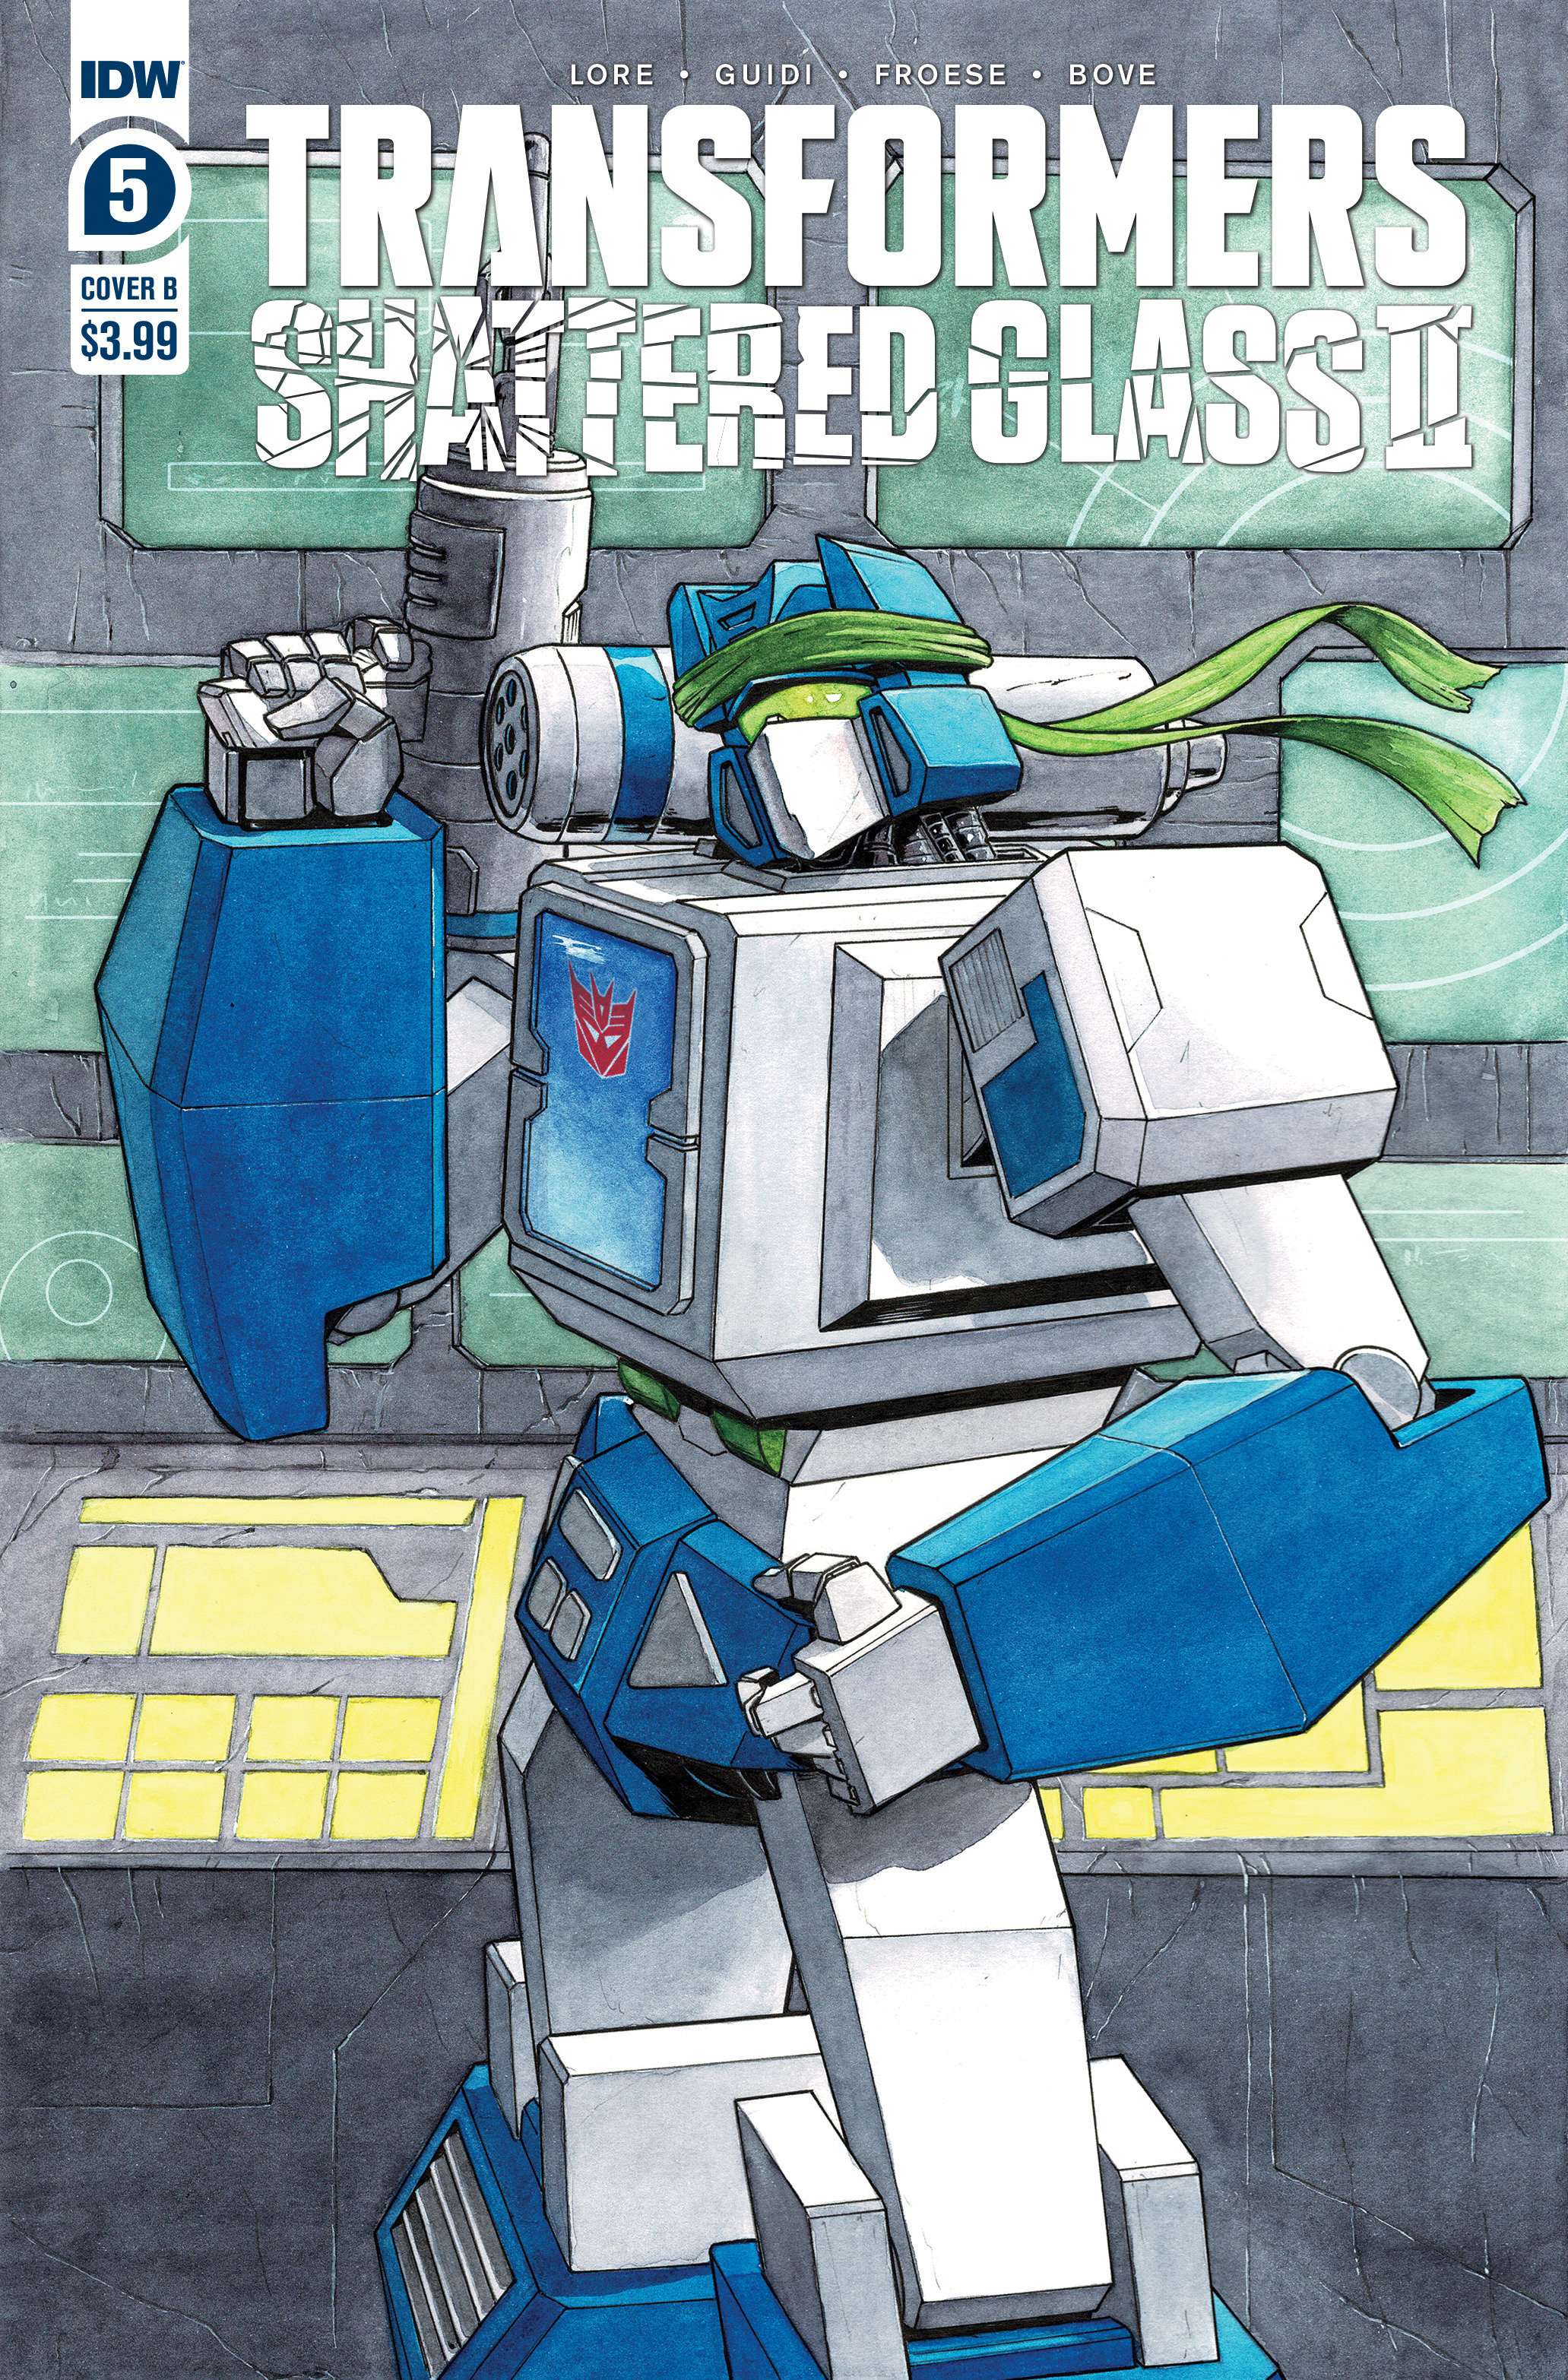 Transformers Shattered Glass II #5 Cover B Kershaw